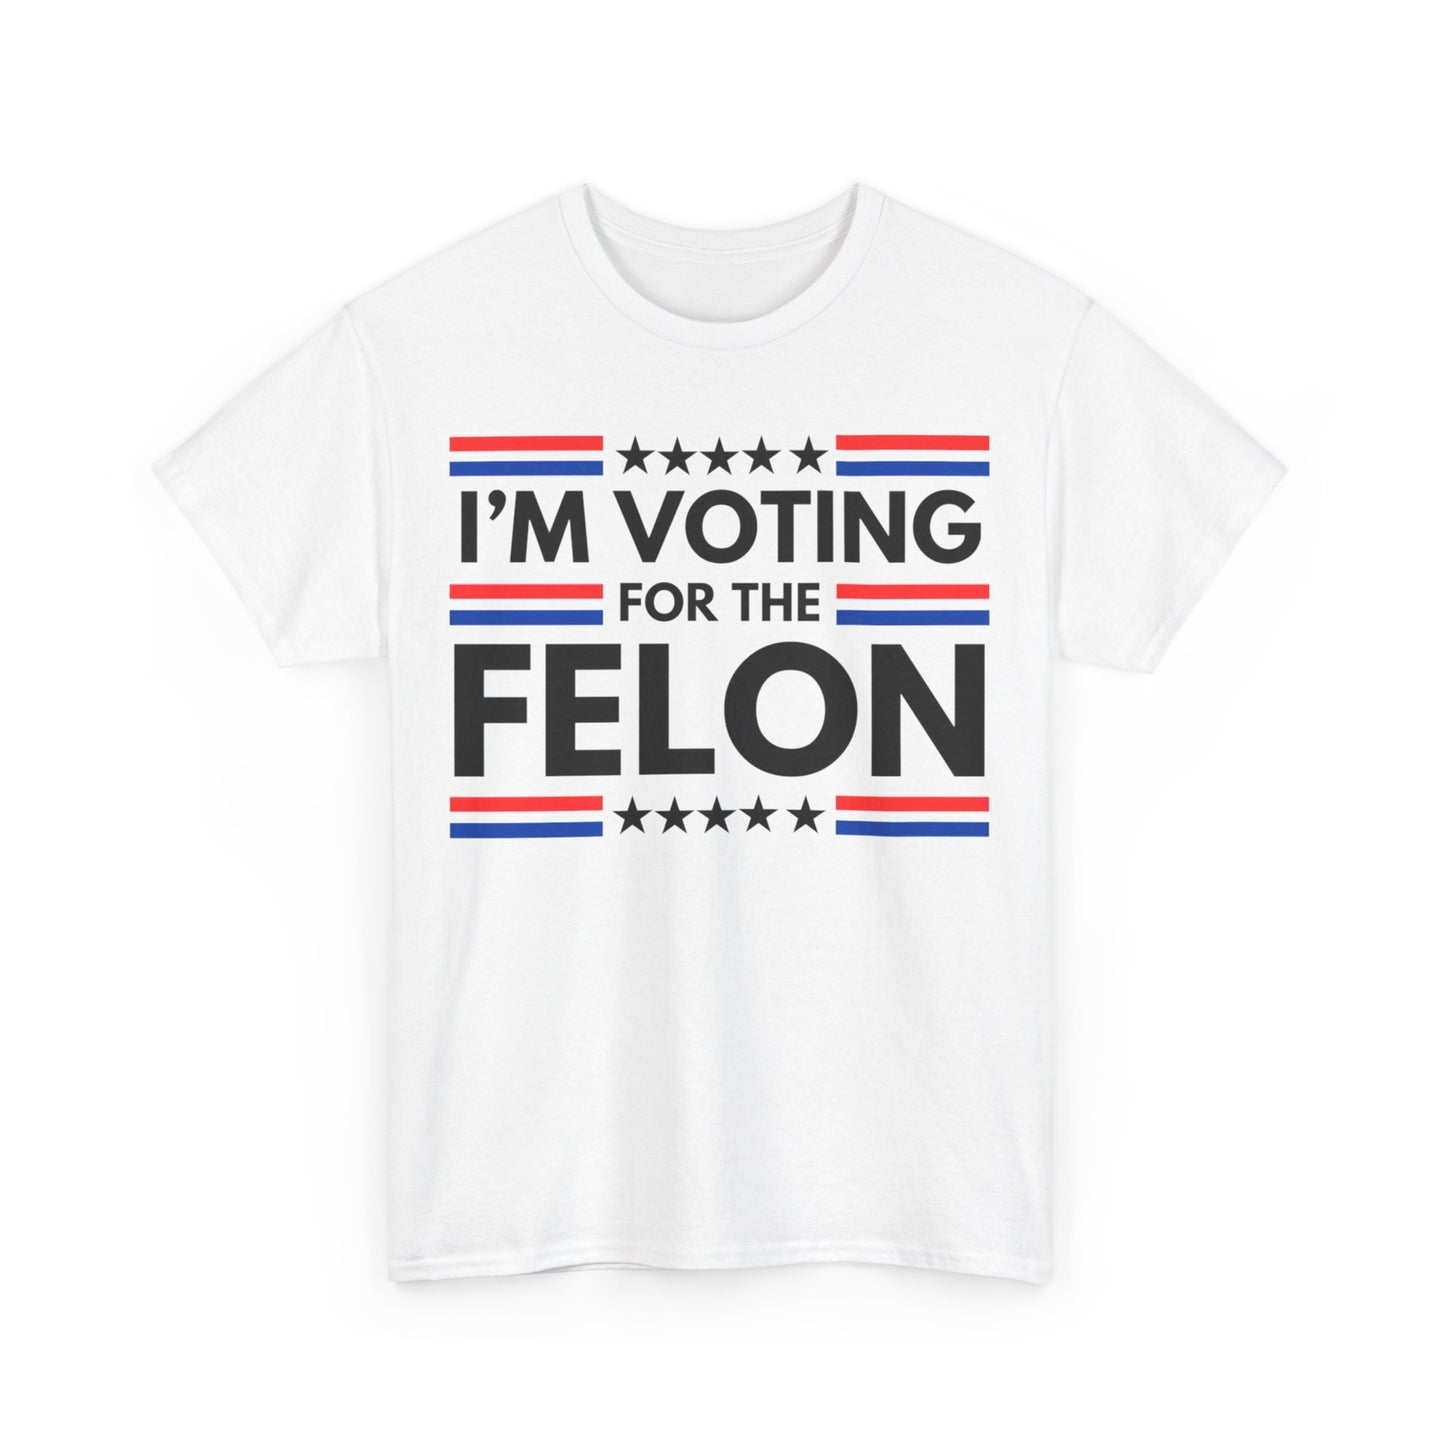 Get trendy with "I'm Voting for the felon" front side only Unisex Heavy Cotton Tee - T-Shirt available at Good Gift Company. Grab yours for $13.65 today!